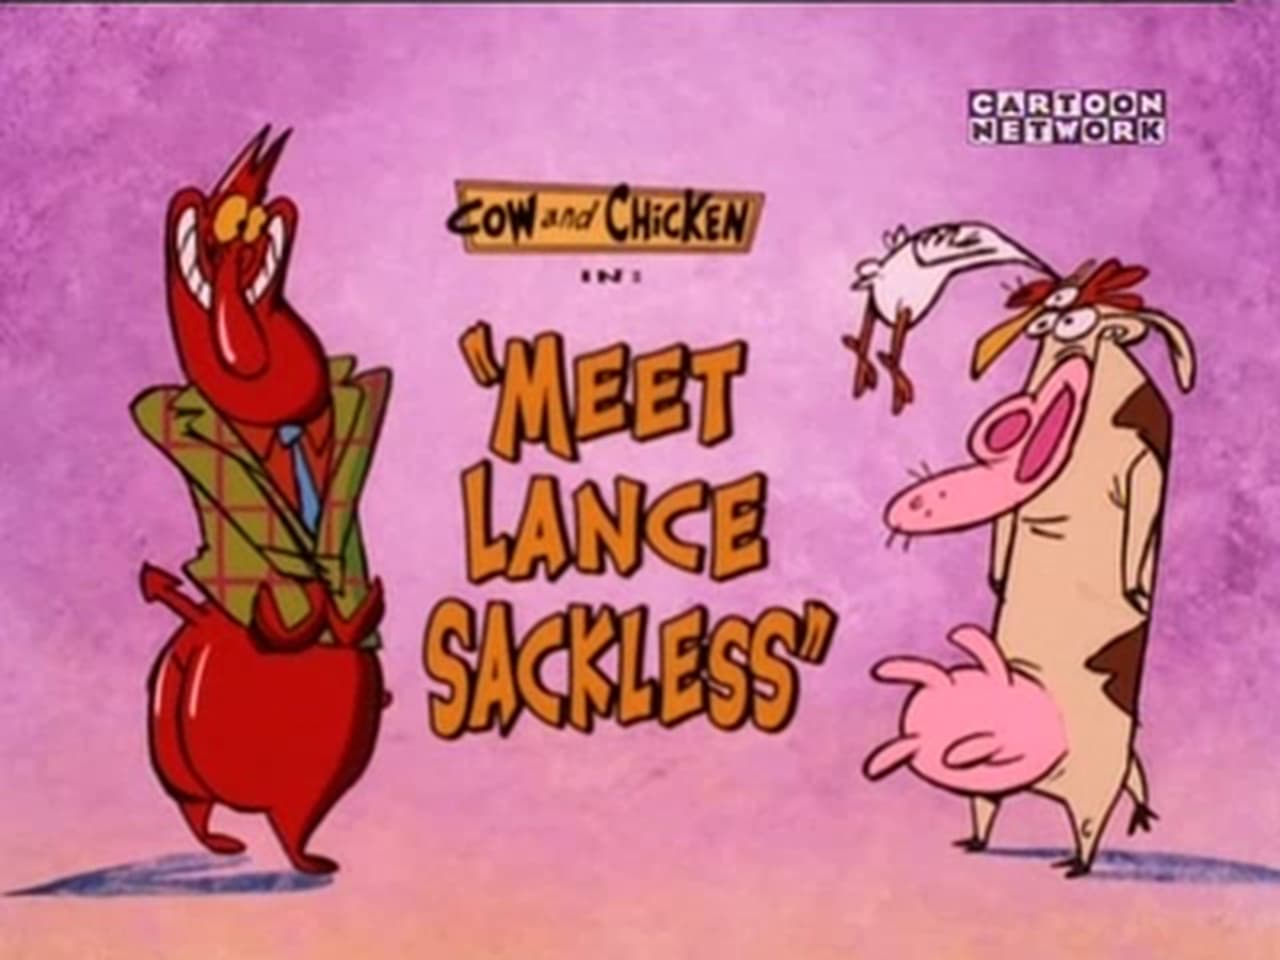 Cow and Chicken - Season 2 Episode 19 : Meet Lance Sackless